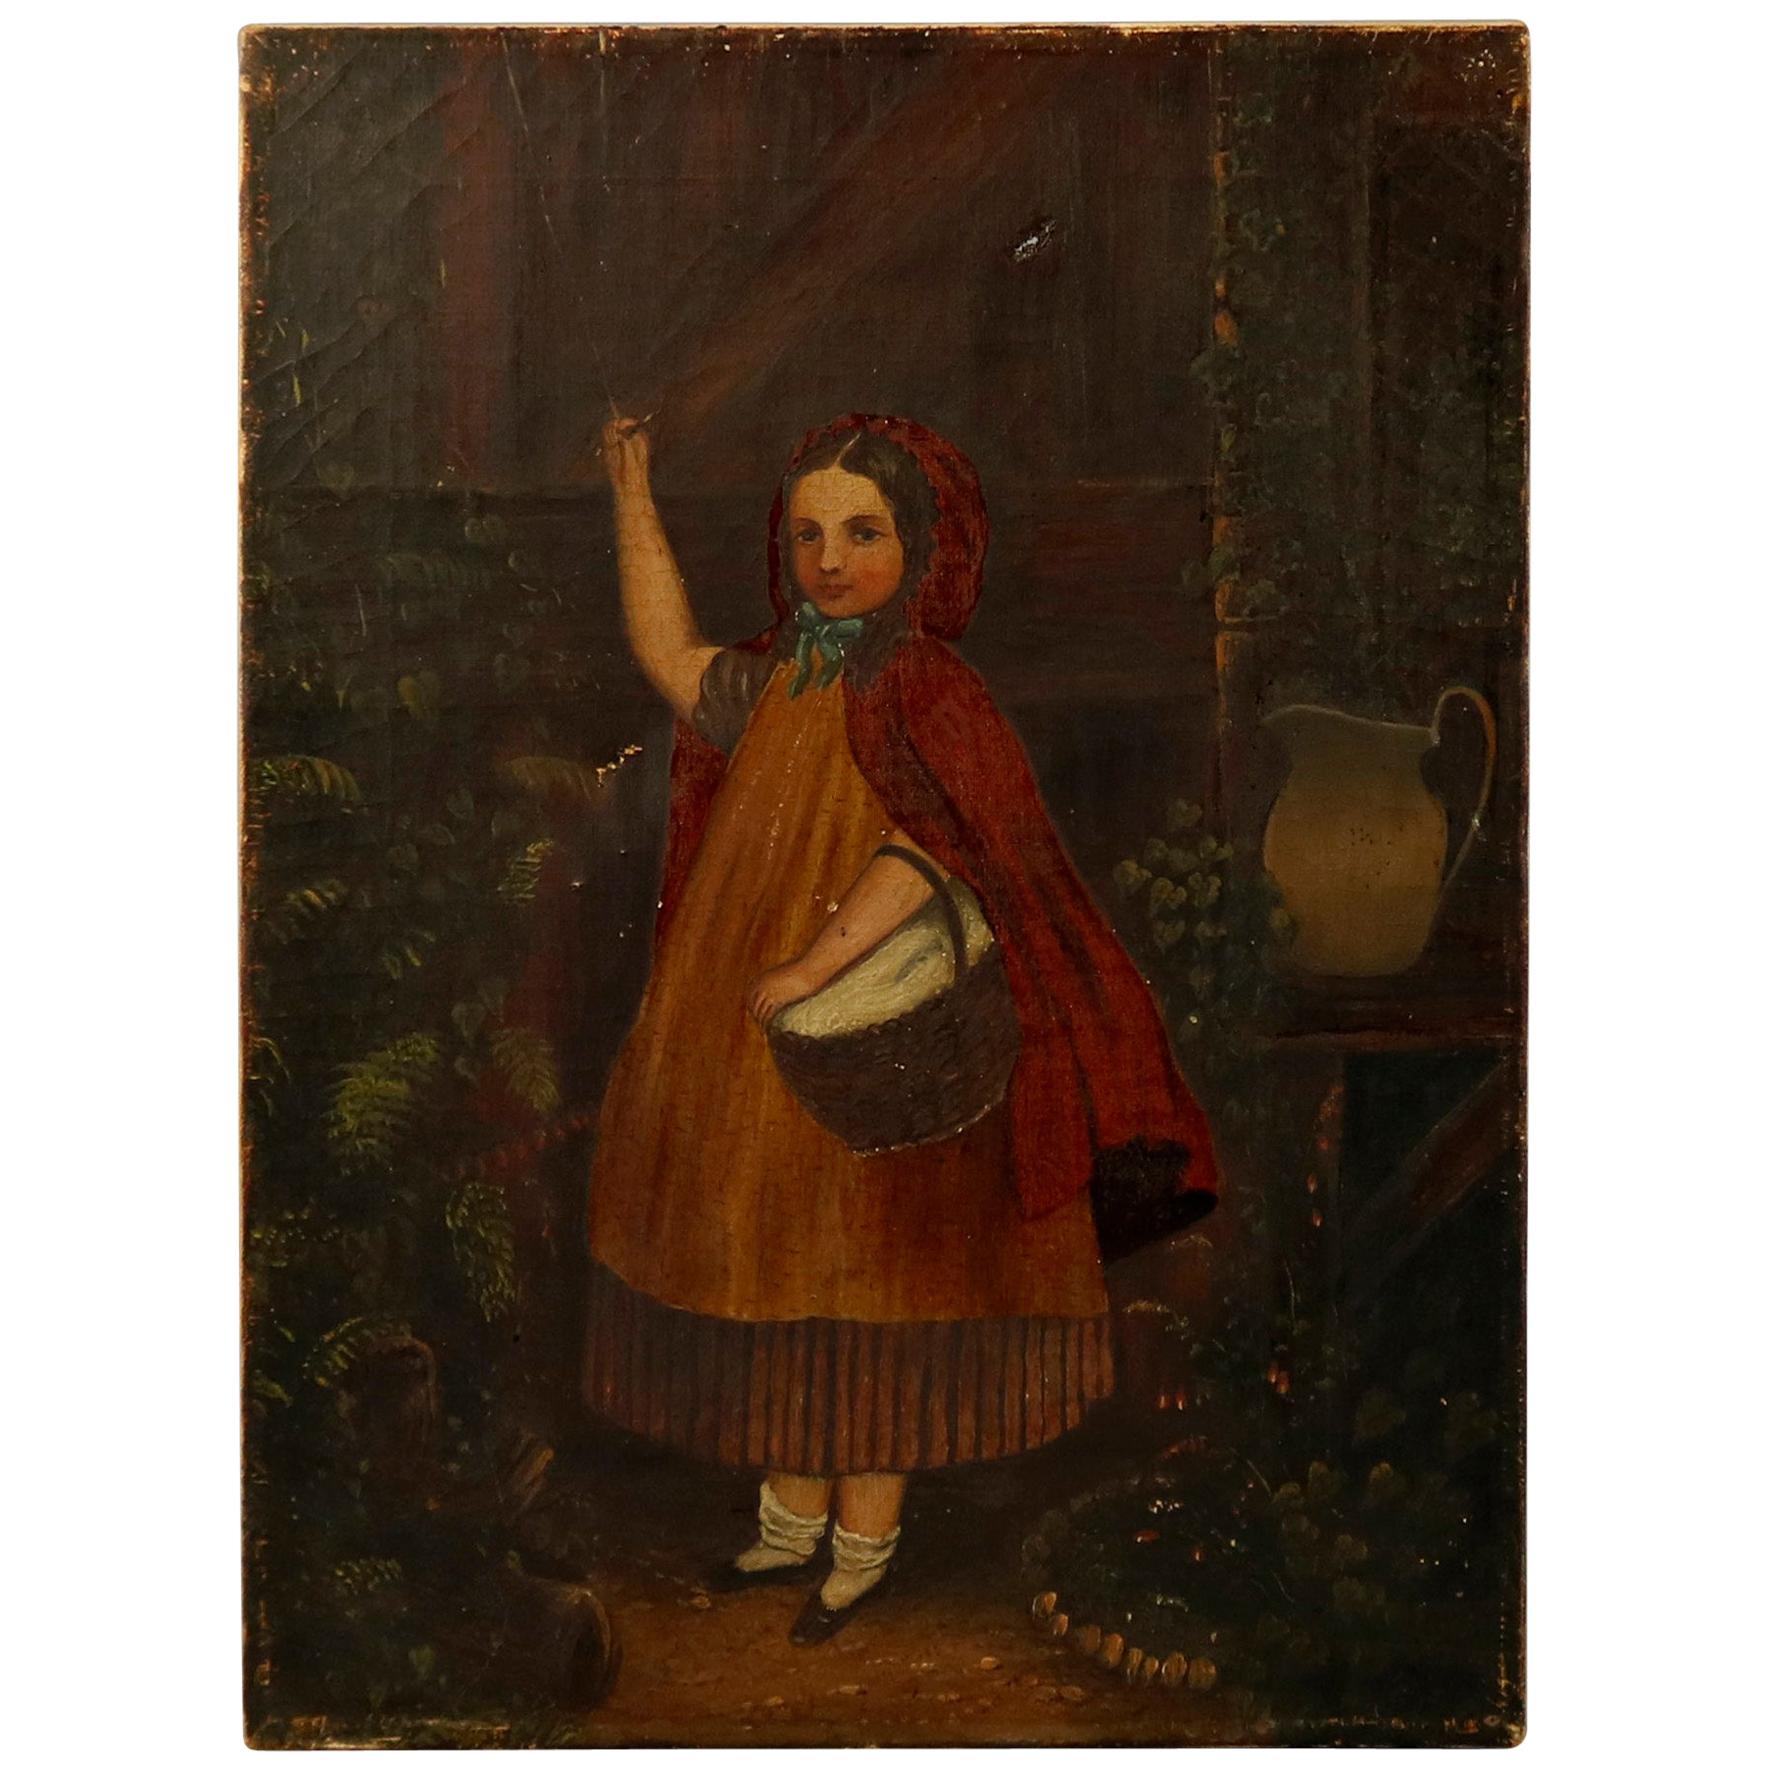 Antique Oil on Canvas Portrait Painting of Little Red Riding Hood, circa 1900